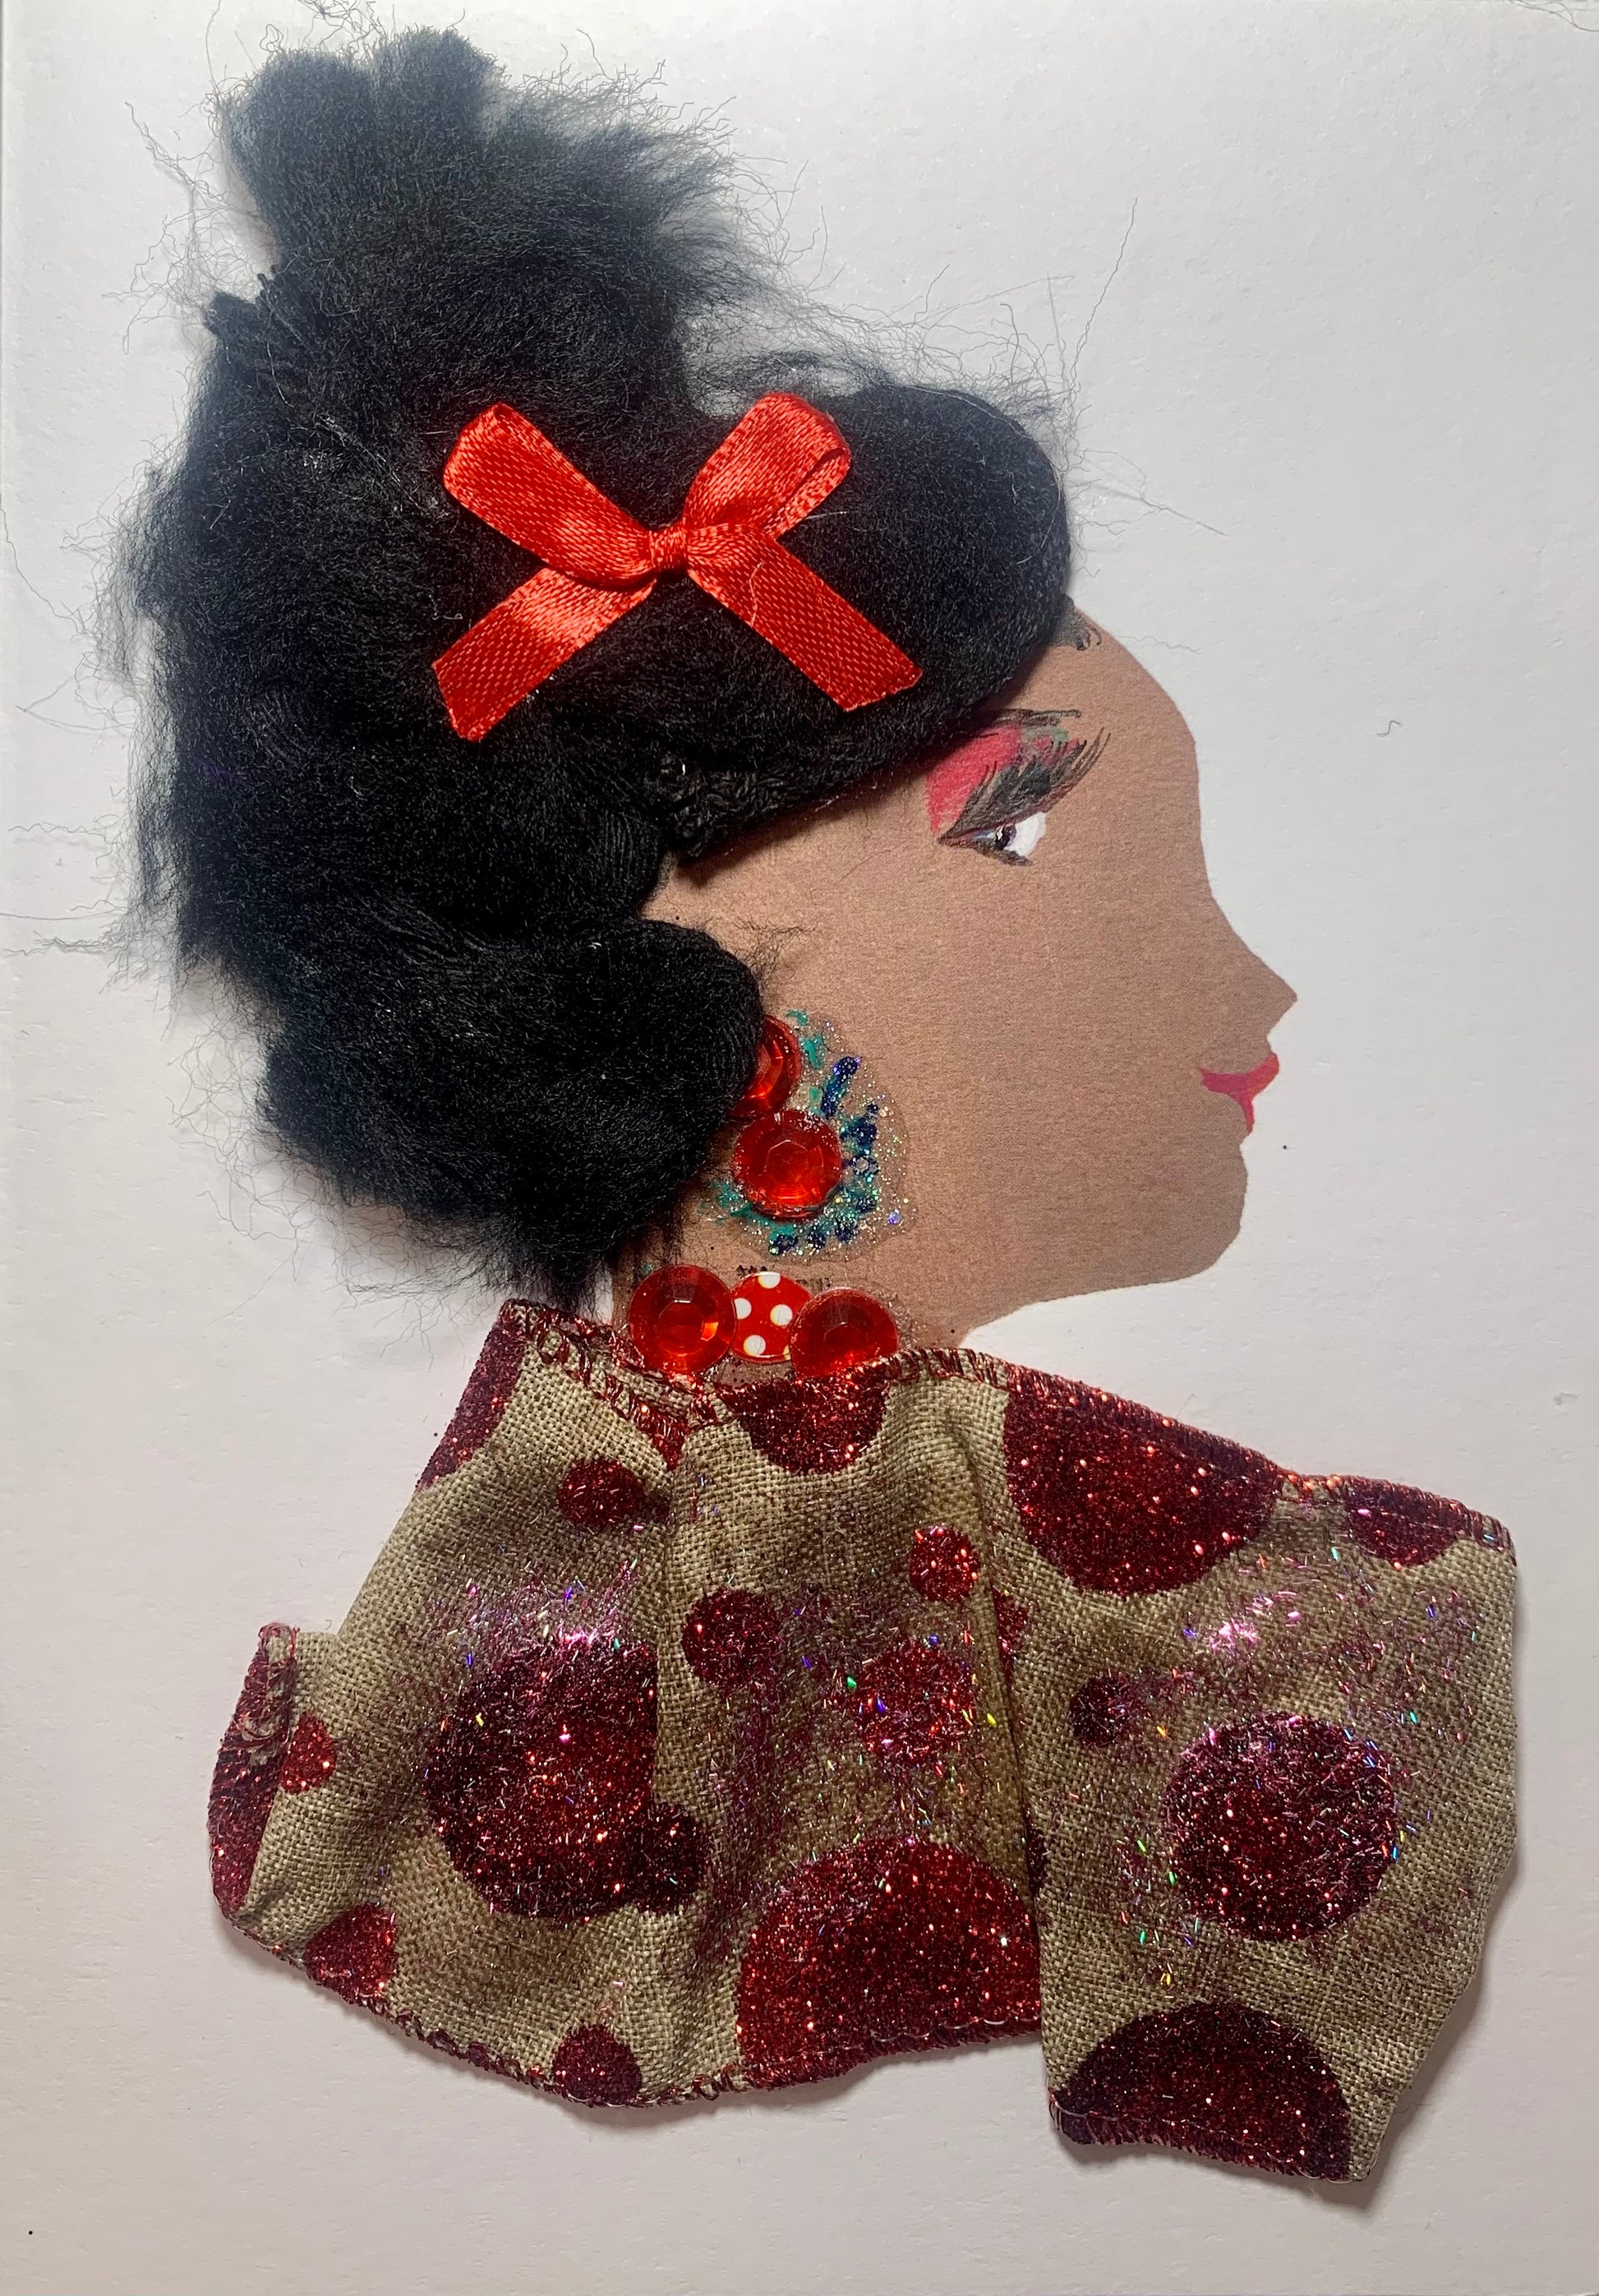 This card is of a woman named Vero Paris. She wears a blouse with red glitter polka dots on it. Her jewellery is made of red gems, and there is a red bow in her black hair. 